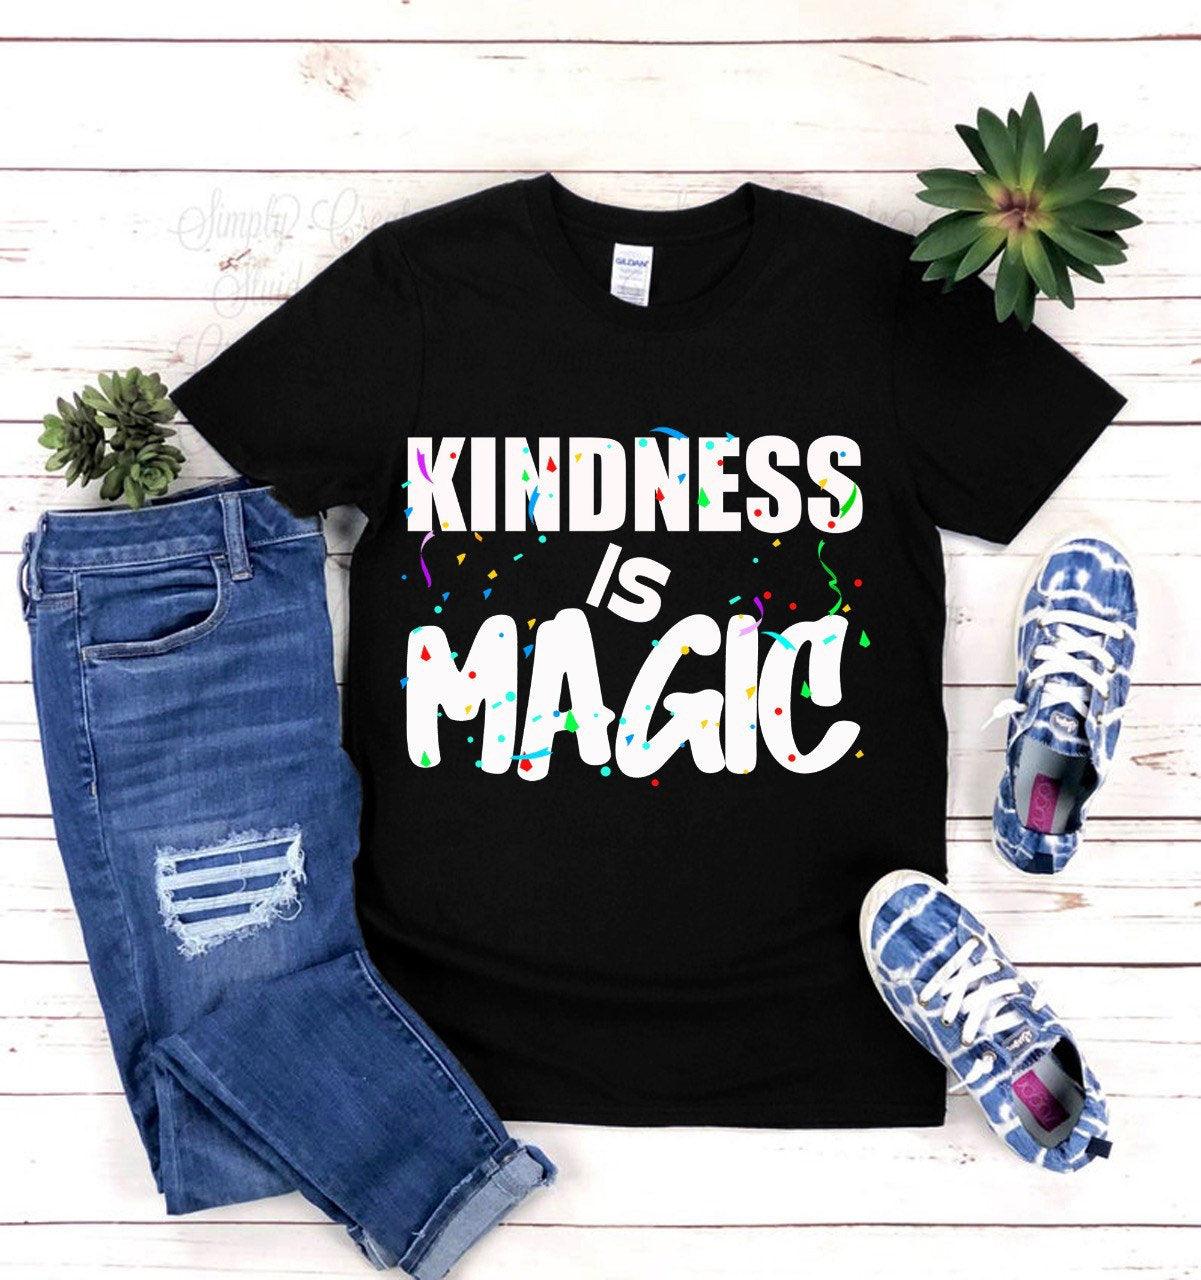 Kindness Is Magic Black T-Shirts, Kindness Is Magic T-Shirts, Inspirational Shirt, Motivational Shirt, Positive Shirt, Cute Shirt for Women anti bully, be kind and real, be kind to others, Born real not per, inspirational shirt, inspirational shirts, Kindness Is Magic, mental health shirt, motivation shirt, motivational shirt, not perfect but, positive shirt, positivity shirt - plusminusco.com